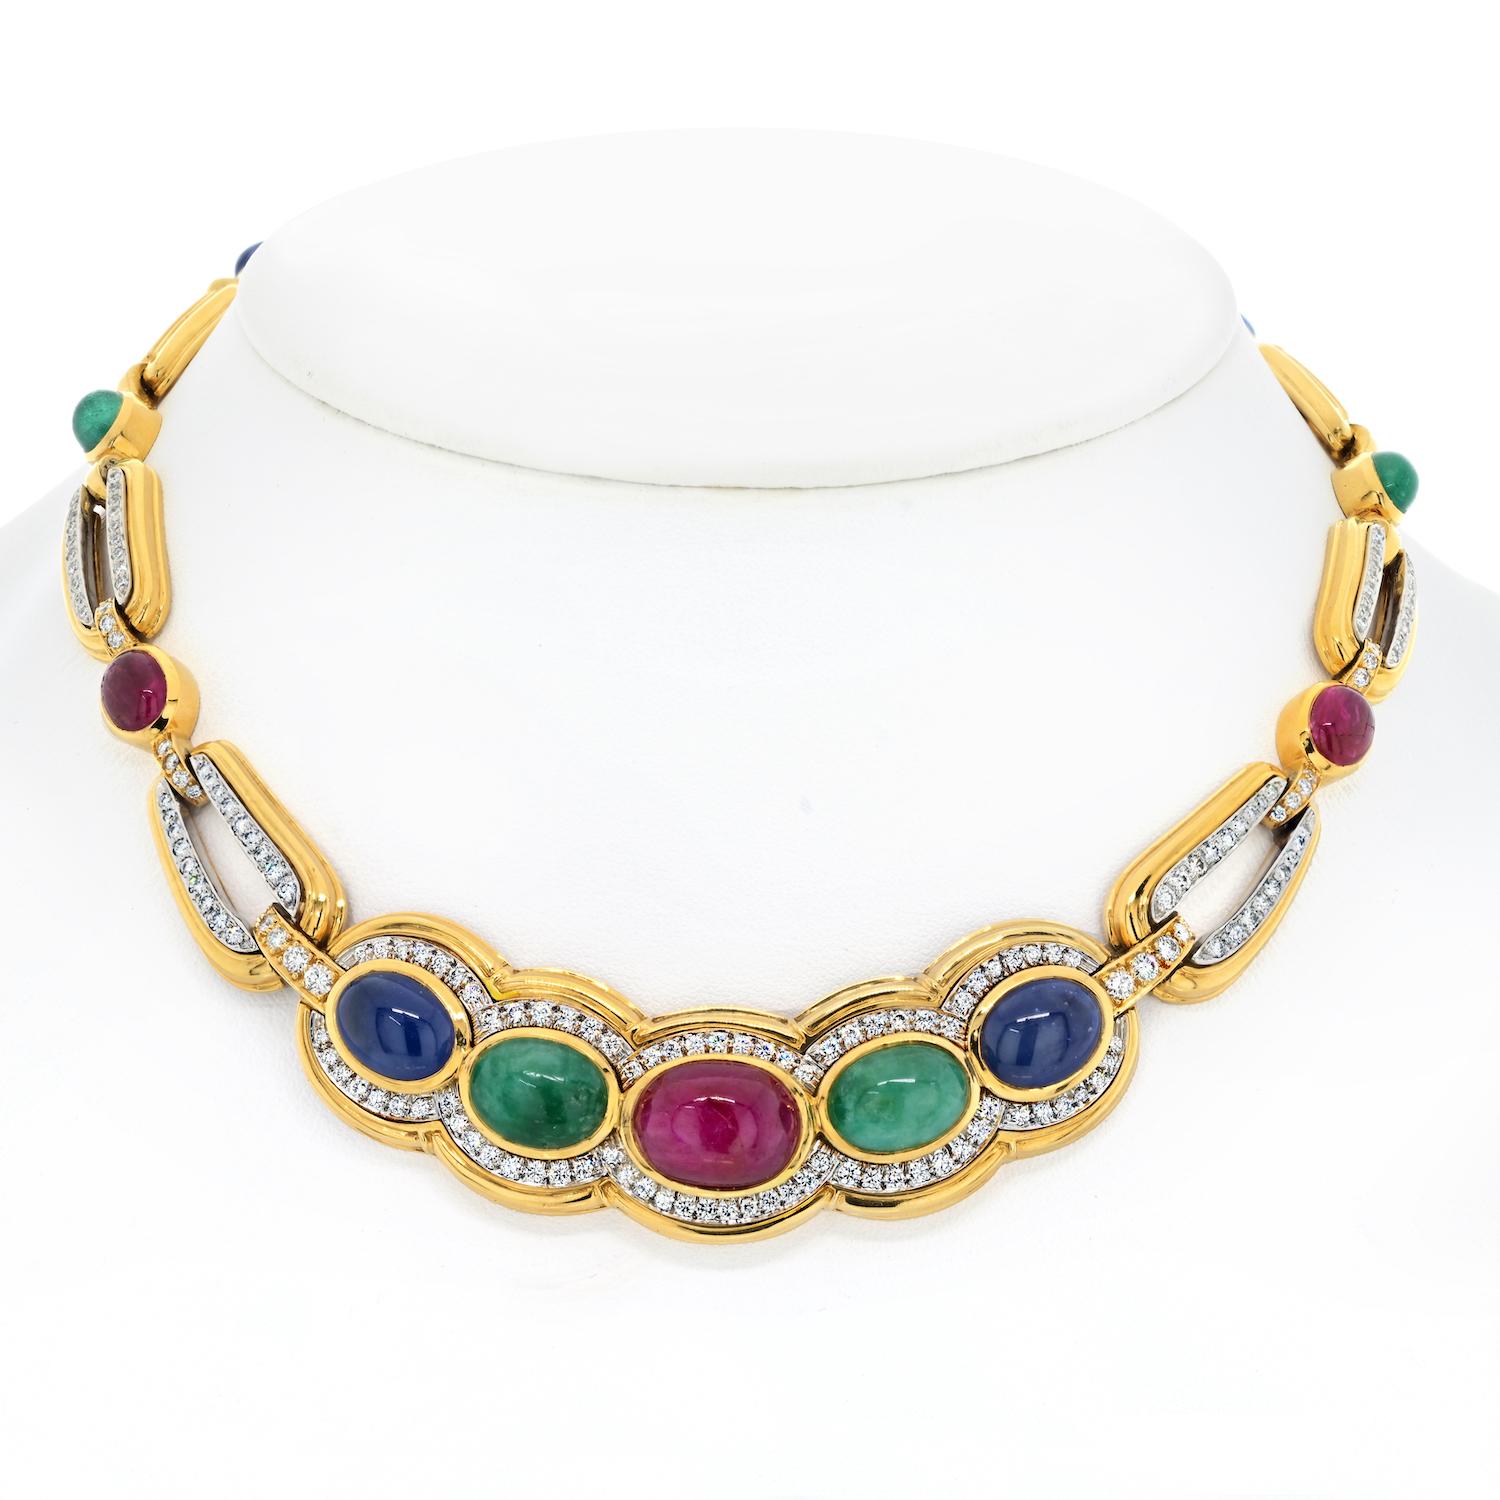 The estate David Webb Platinum & 18K Yellow Gold Cabochon Cut Sapphire, Ruby, and Emerald Necklace is an extraordinary piece that encapsulates the designer's flair for merging timeless elegance with opulent craftsmanship. 

The necklace is adorned